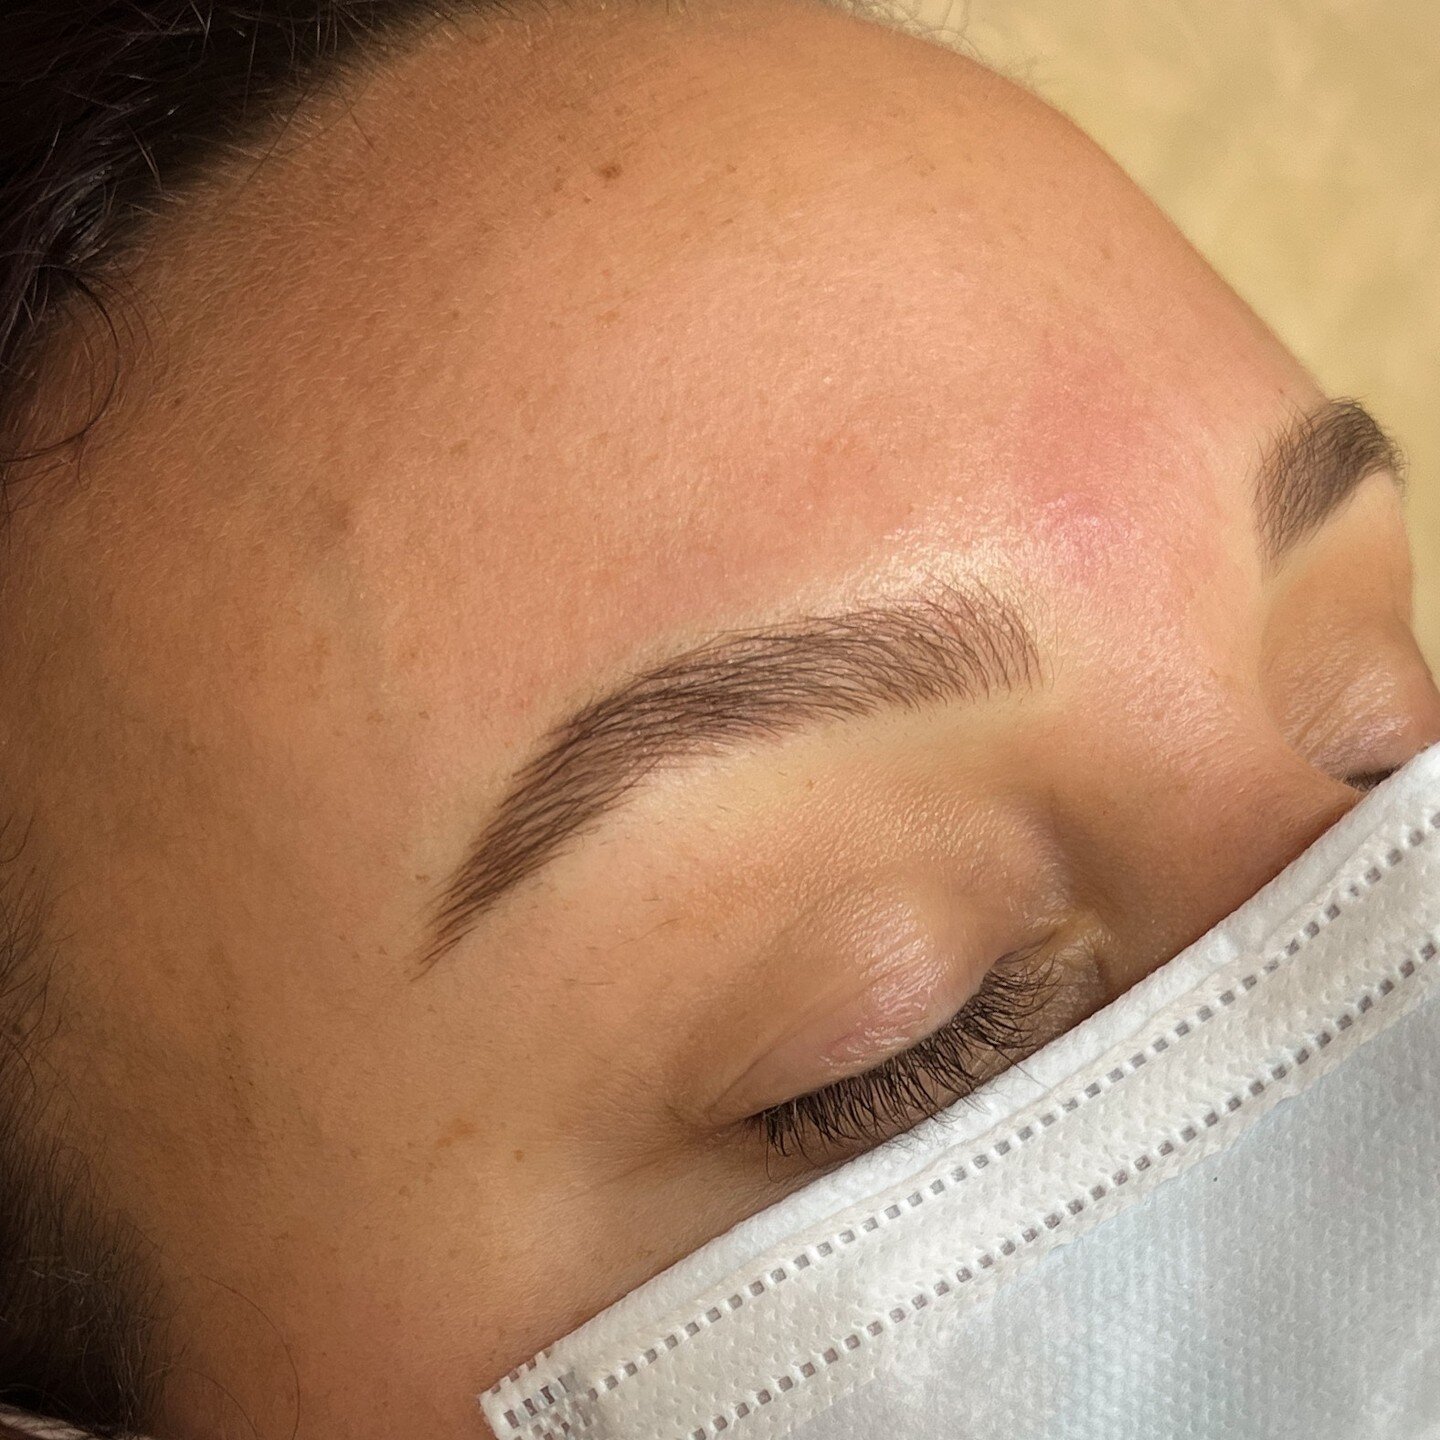 Natural Microblading by @KatleynxPainter ❤️&zwj;🔥⁠
⁠
&bull;Results last 1.5-2 years⁠
&bull;Booking link in bio⁠
&bull;www.KatelynPainter.com⁠
⁠
⁠
⌓ Feel Good Beauty Studios⁠
⌓ Collaborative Beauty Services &amp; Shop⁠
⌓ To book an appointment click 